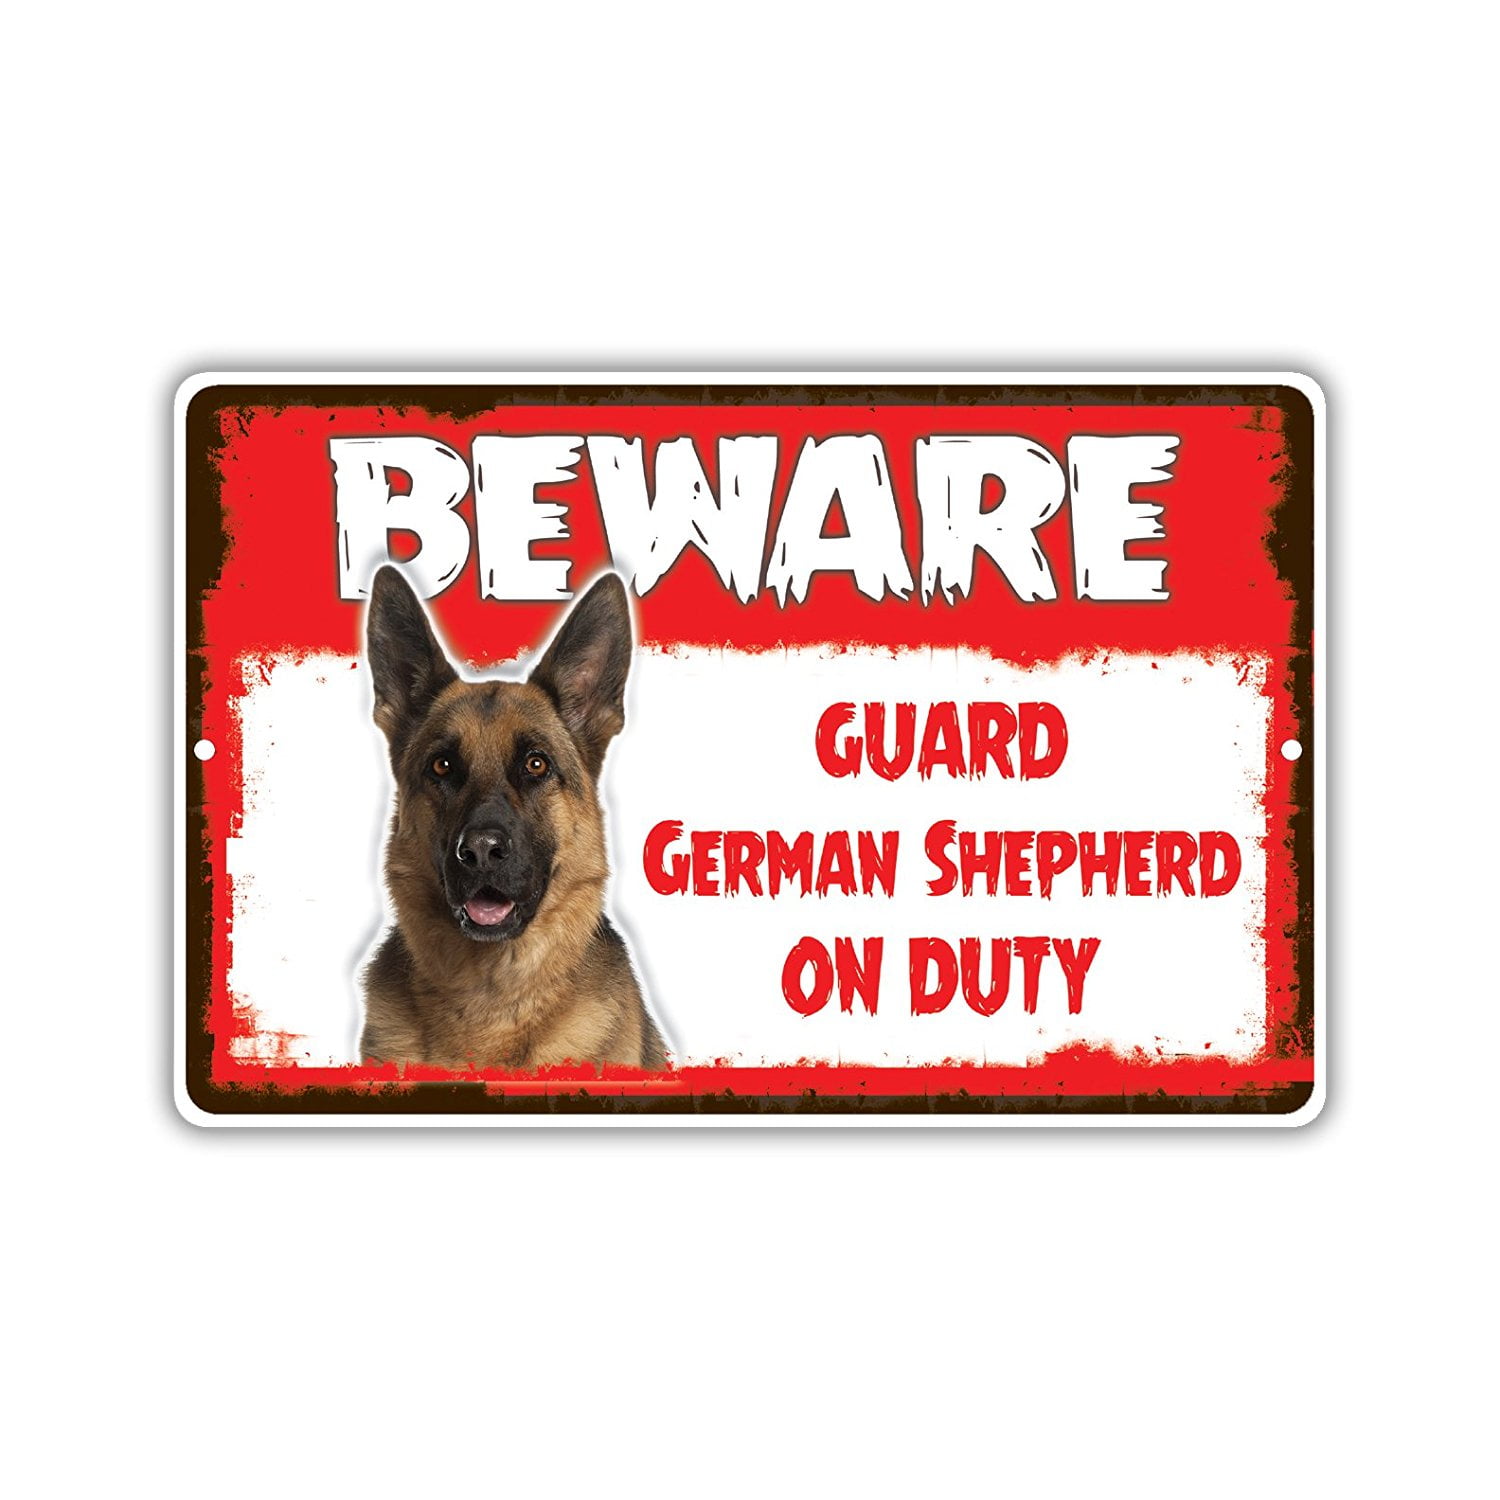 German Shepherd Dog Warning Guard Dog On Duty Caution Sign Outdoor Yellow Diamond Metal Signs Novelty Funny Aluminum Sign Yard Sign Metal Wall Plaque 12x12 inches 